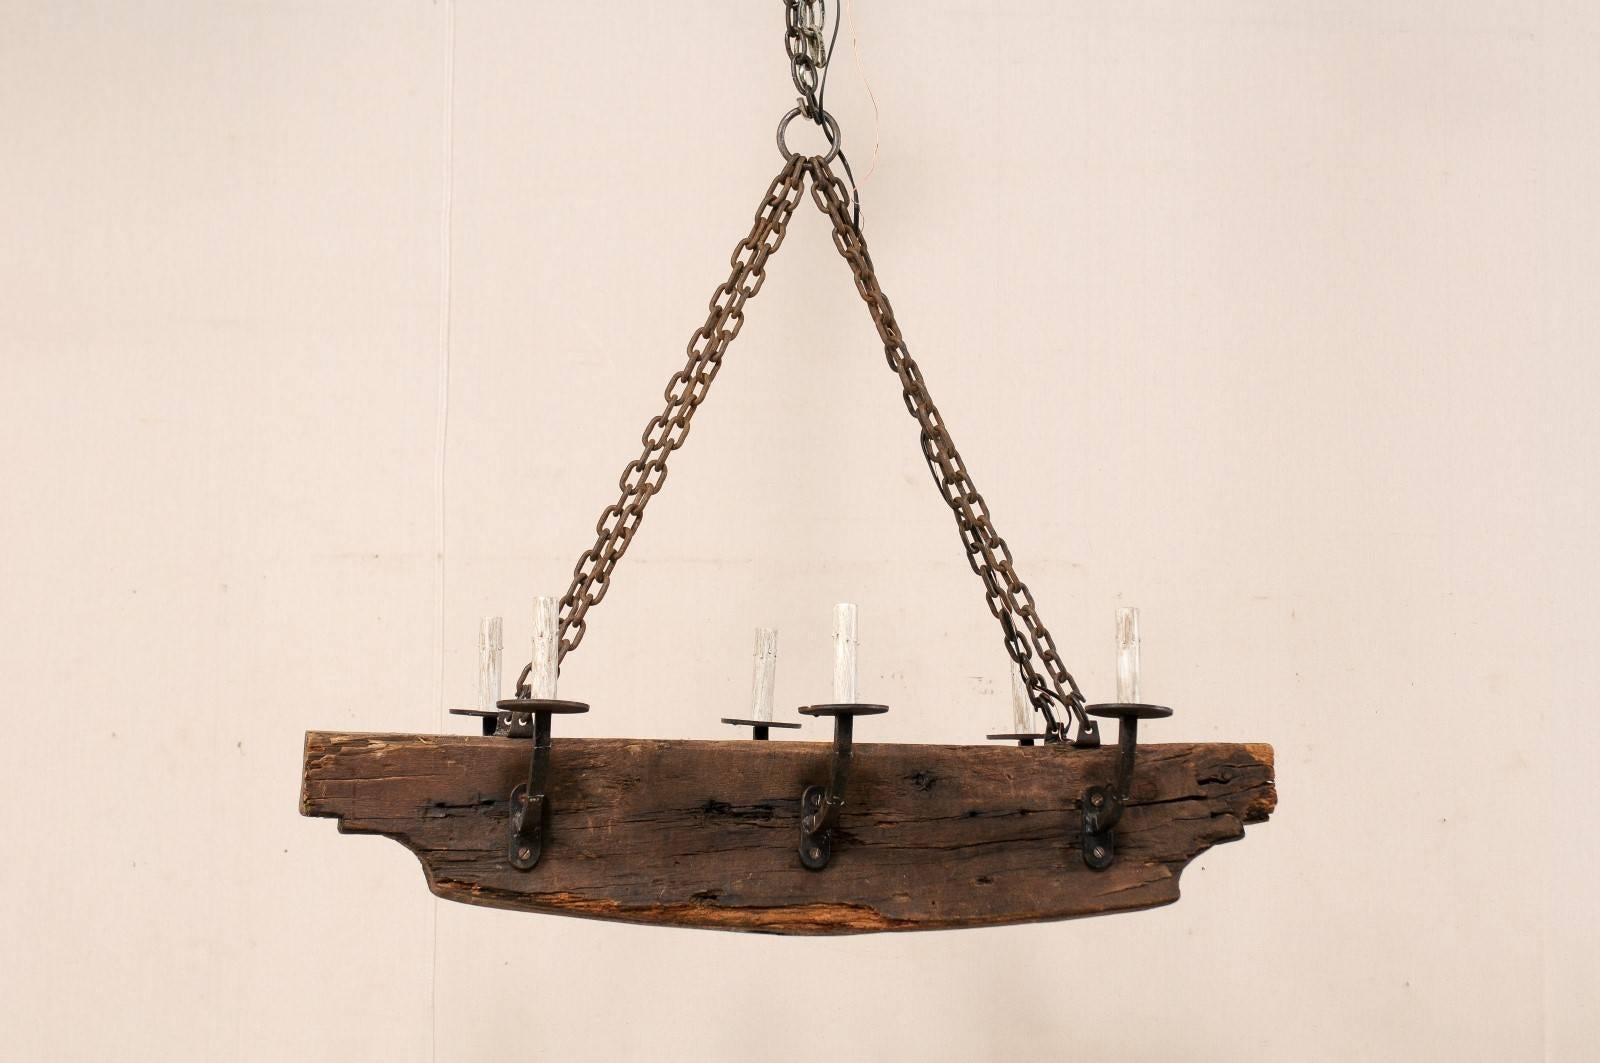 French Rustic Wood Beam Chandelier with Six Forged Iron Arms, Mid 20th C. In Good Condition For Sale In Atlanta, GA